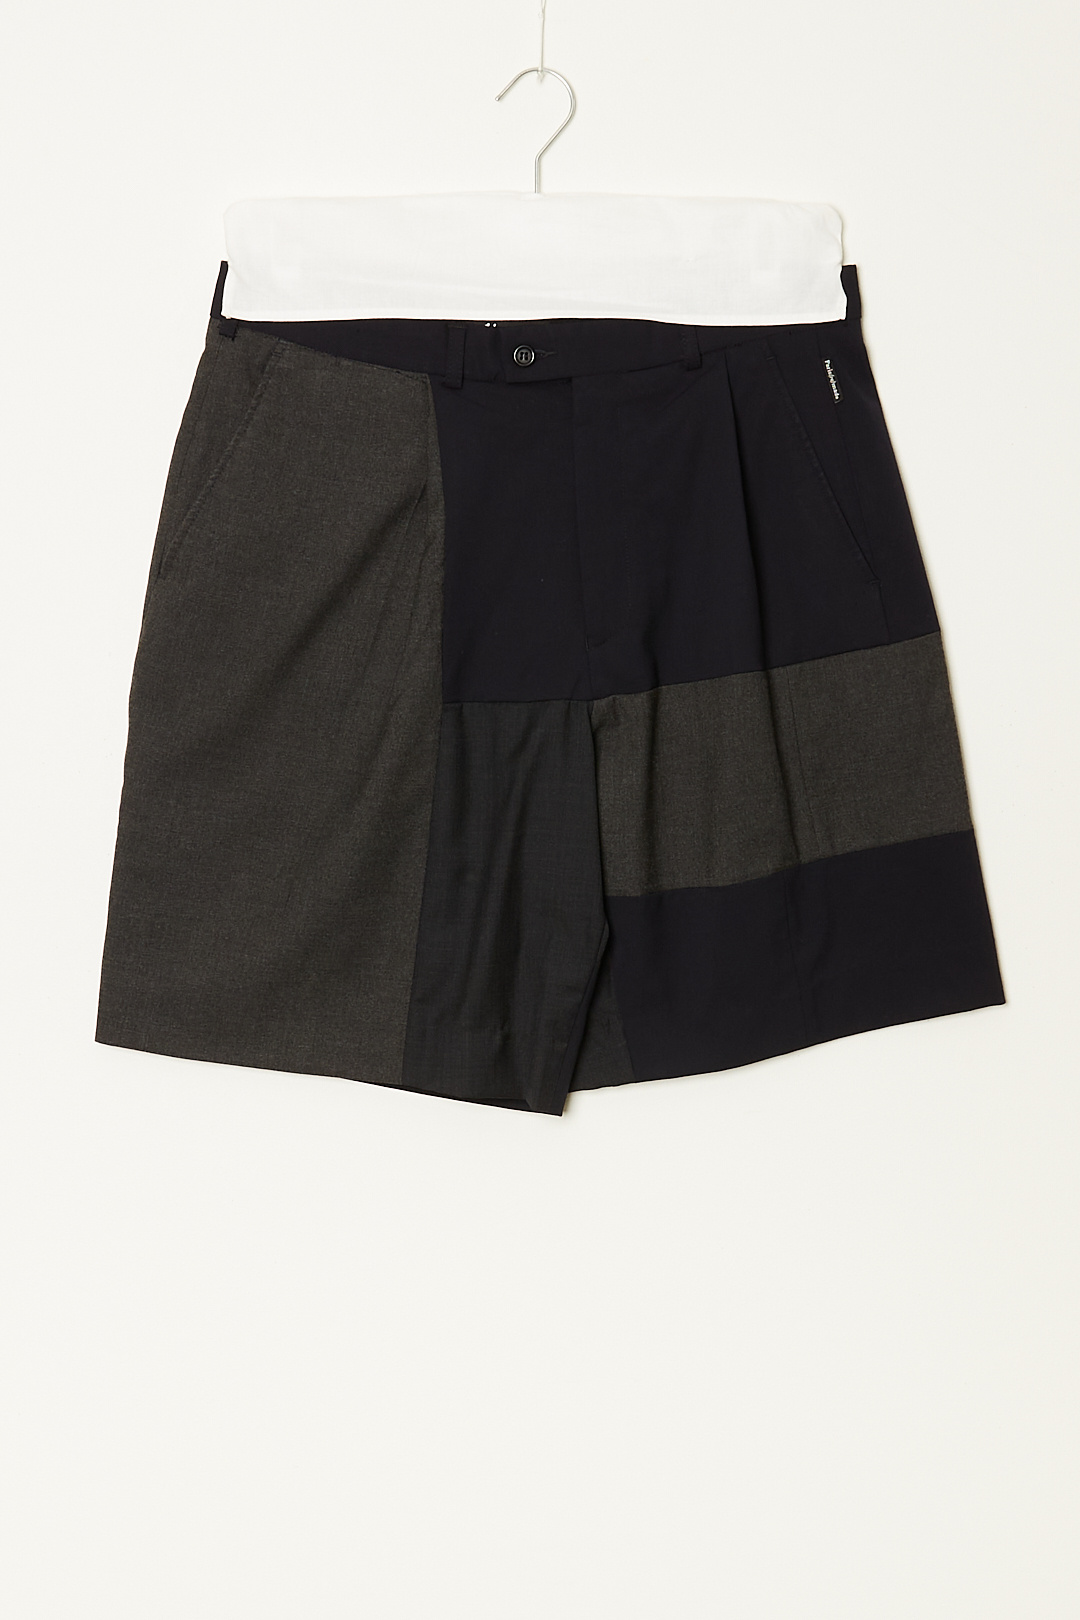 1/OFF - Patchwork shorts